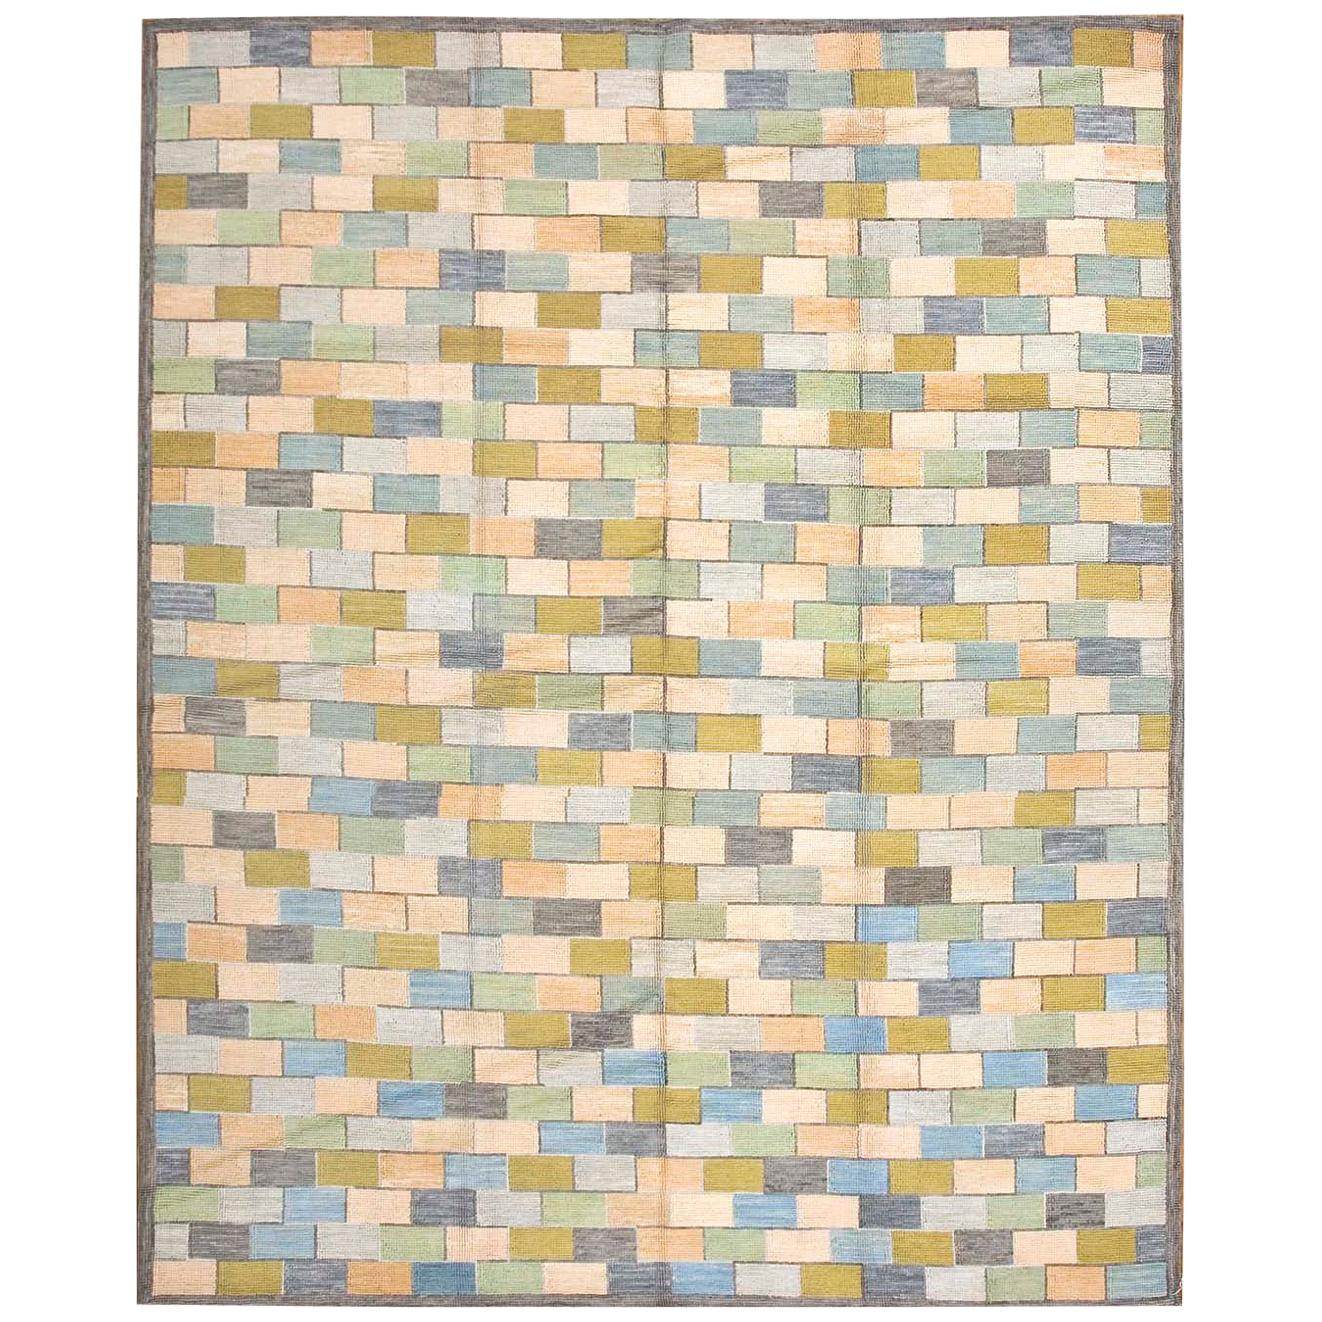 Contemporary American Cotton Hooked Rug 8' 0" x 10' 0" (244 x 305 cm) For Sale